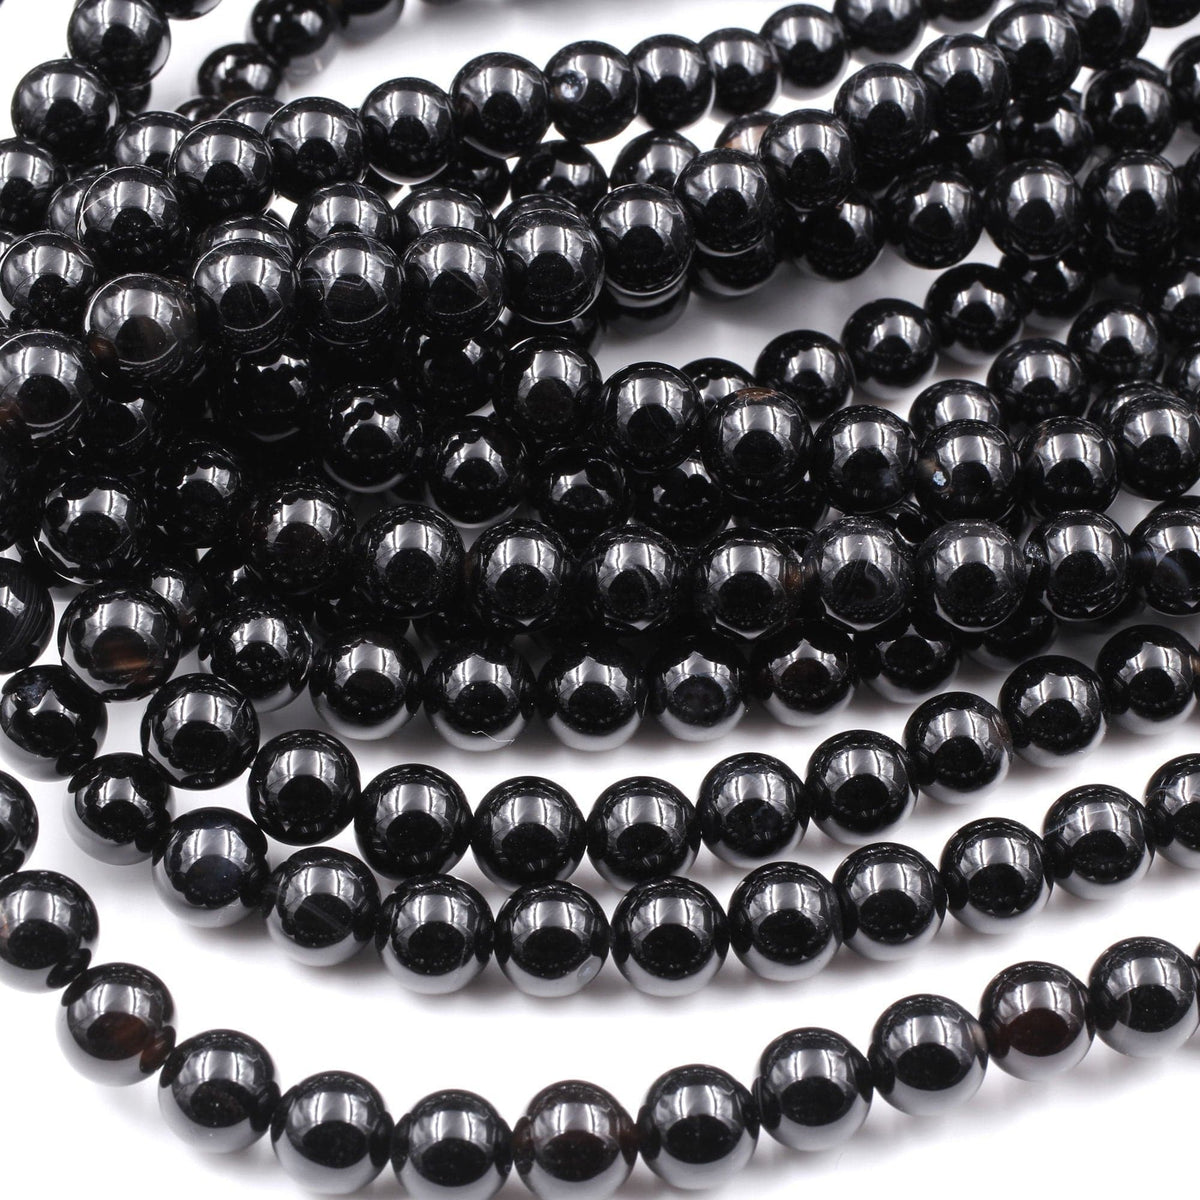 Black Hematite Beads Grade AAA Genuine Natural Gemstone Faceted Round Loose  Beads 2MM 3MM 4MM 6MM 7-8MM 10MM Bulk Lot Options